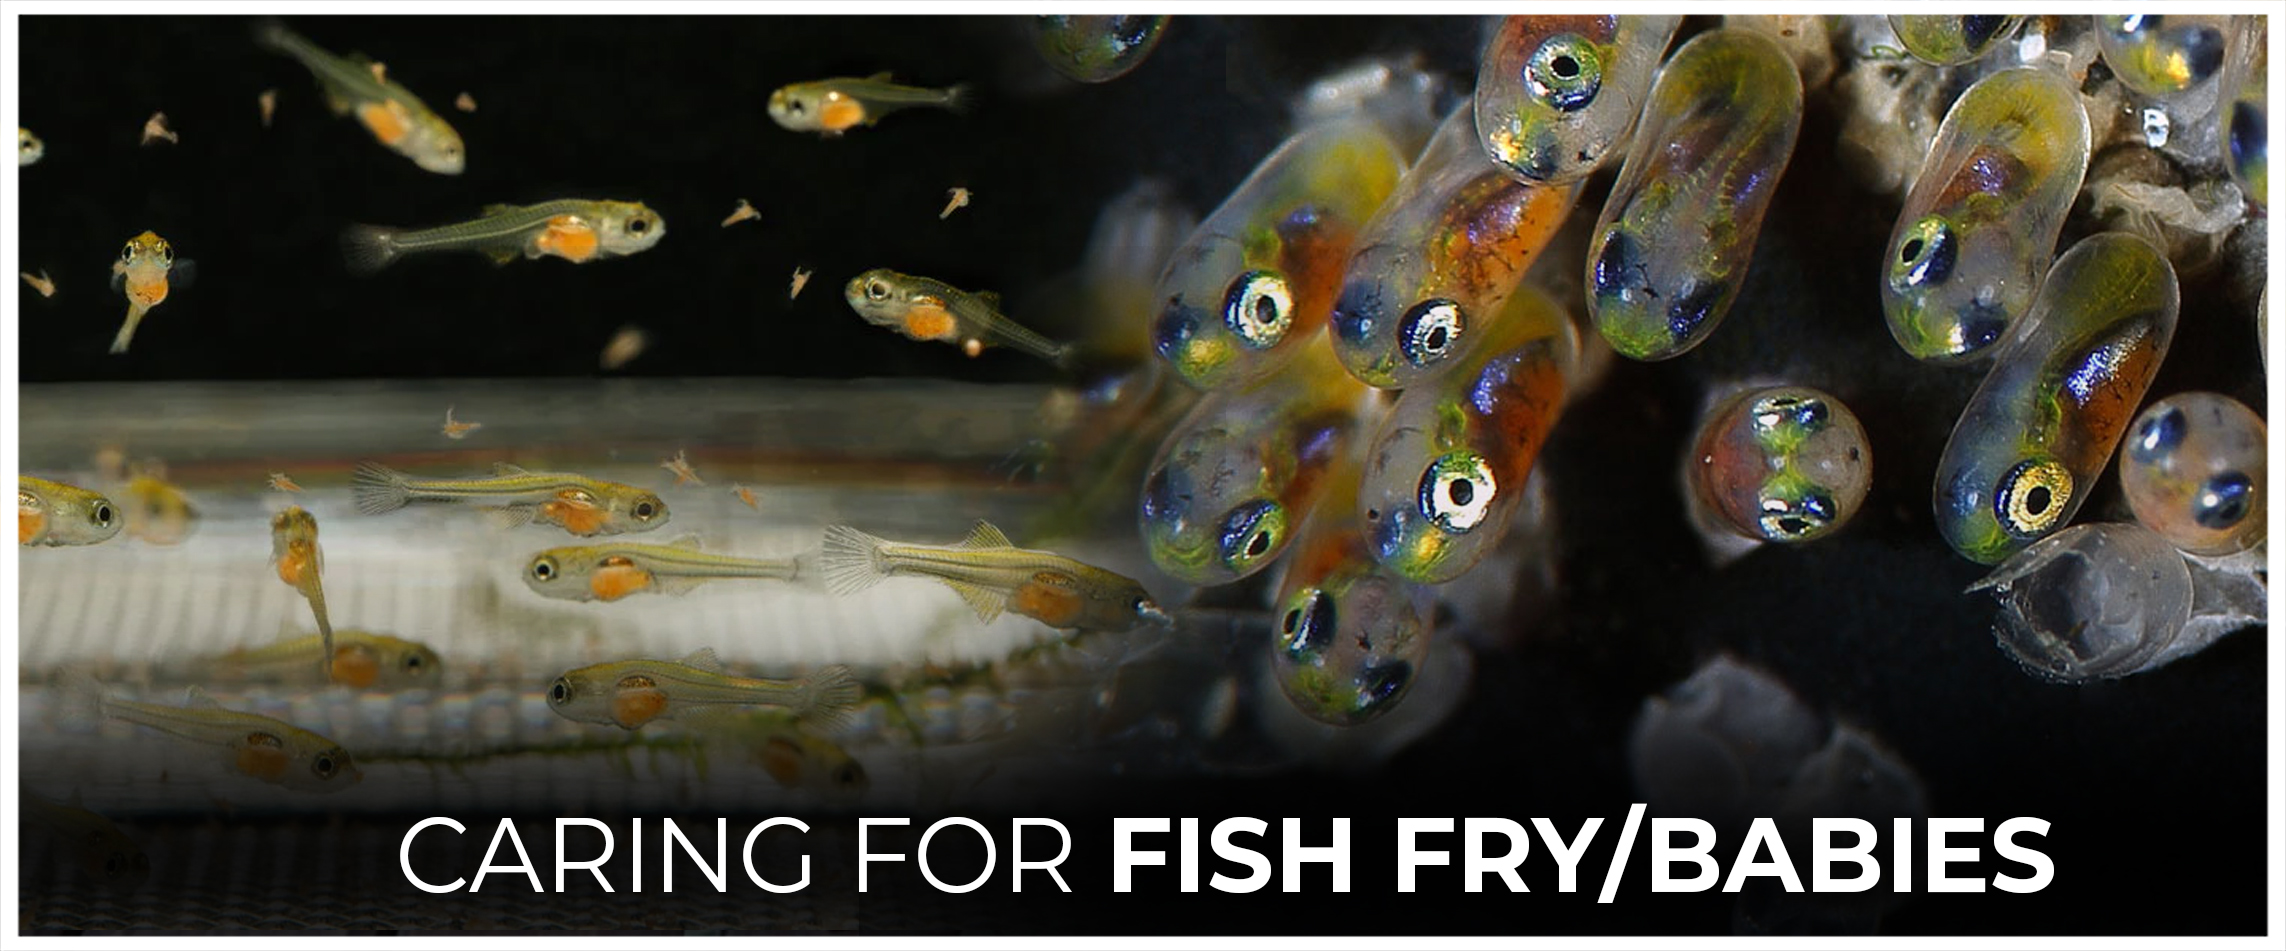 Caring for Fish FryBabies